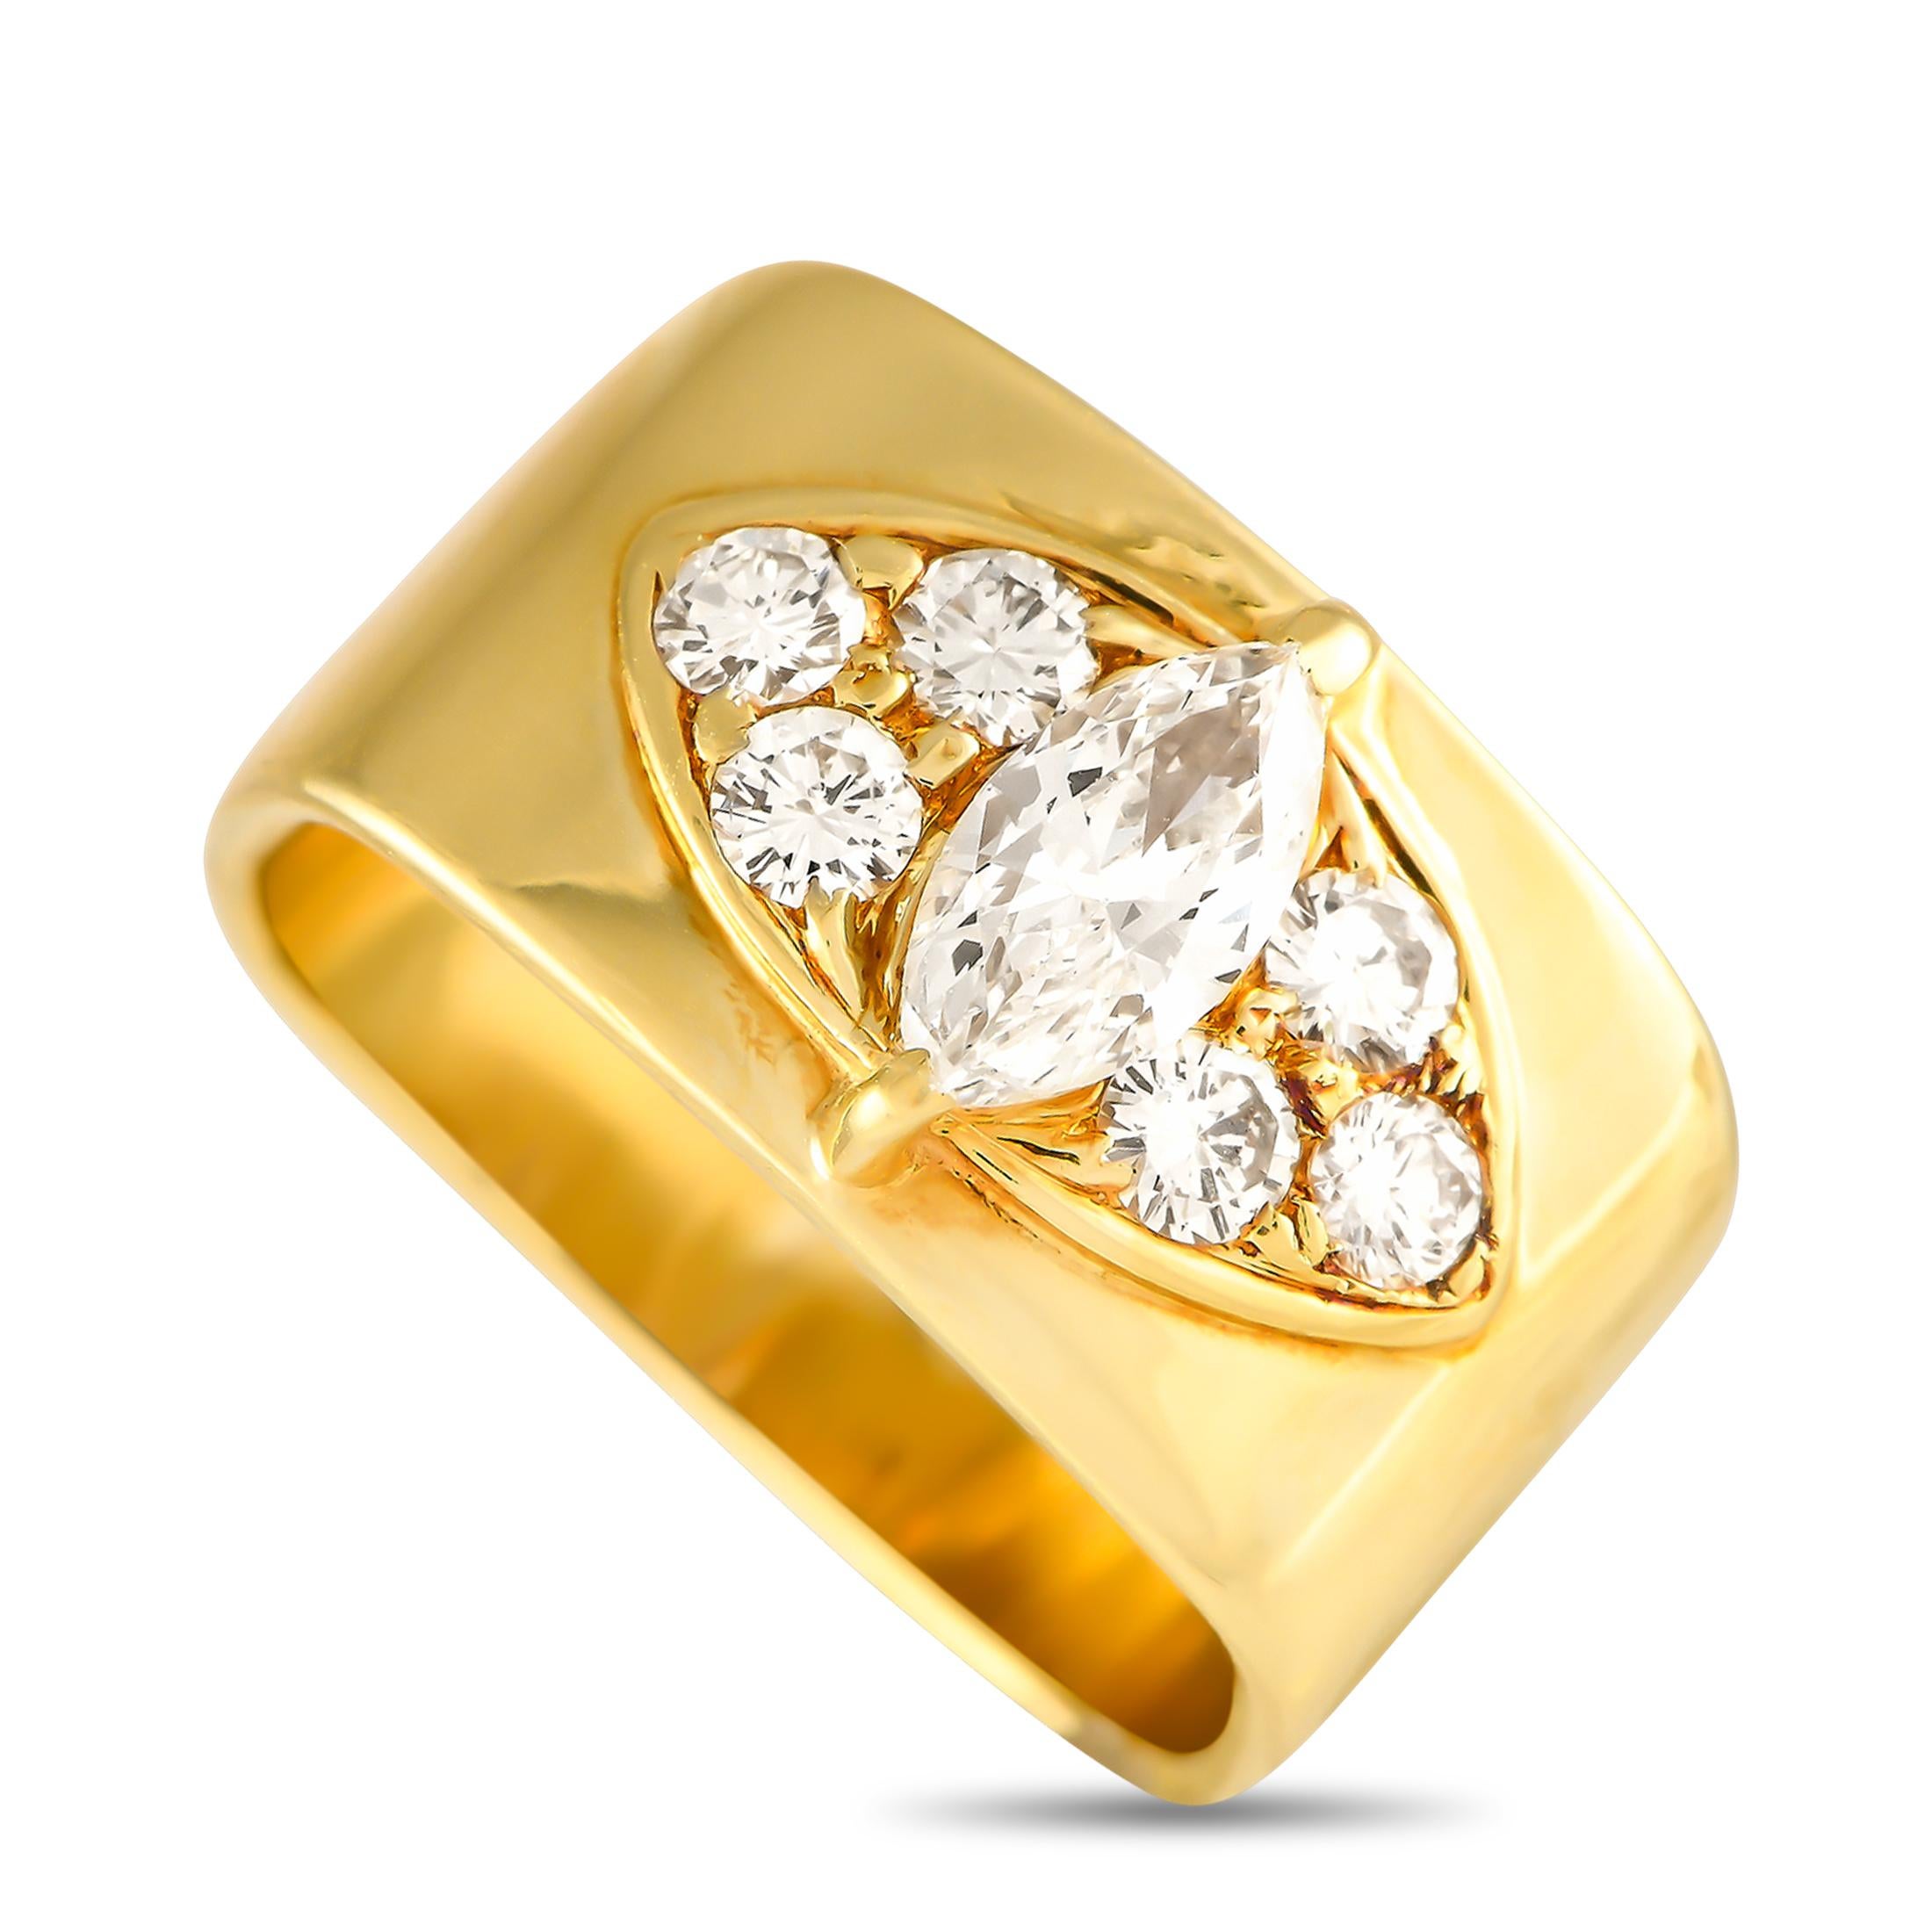 14K Yellow Gold 0.60ct Diamond Ring MF15-020124 In Excellent Condition For Sale In Southampton, PA